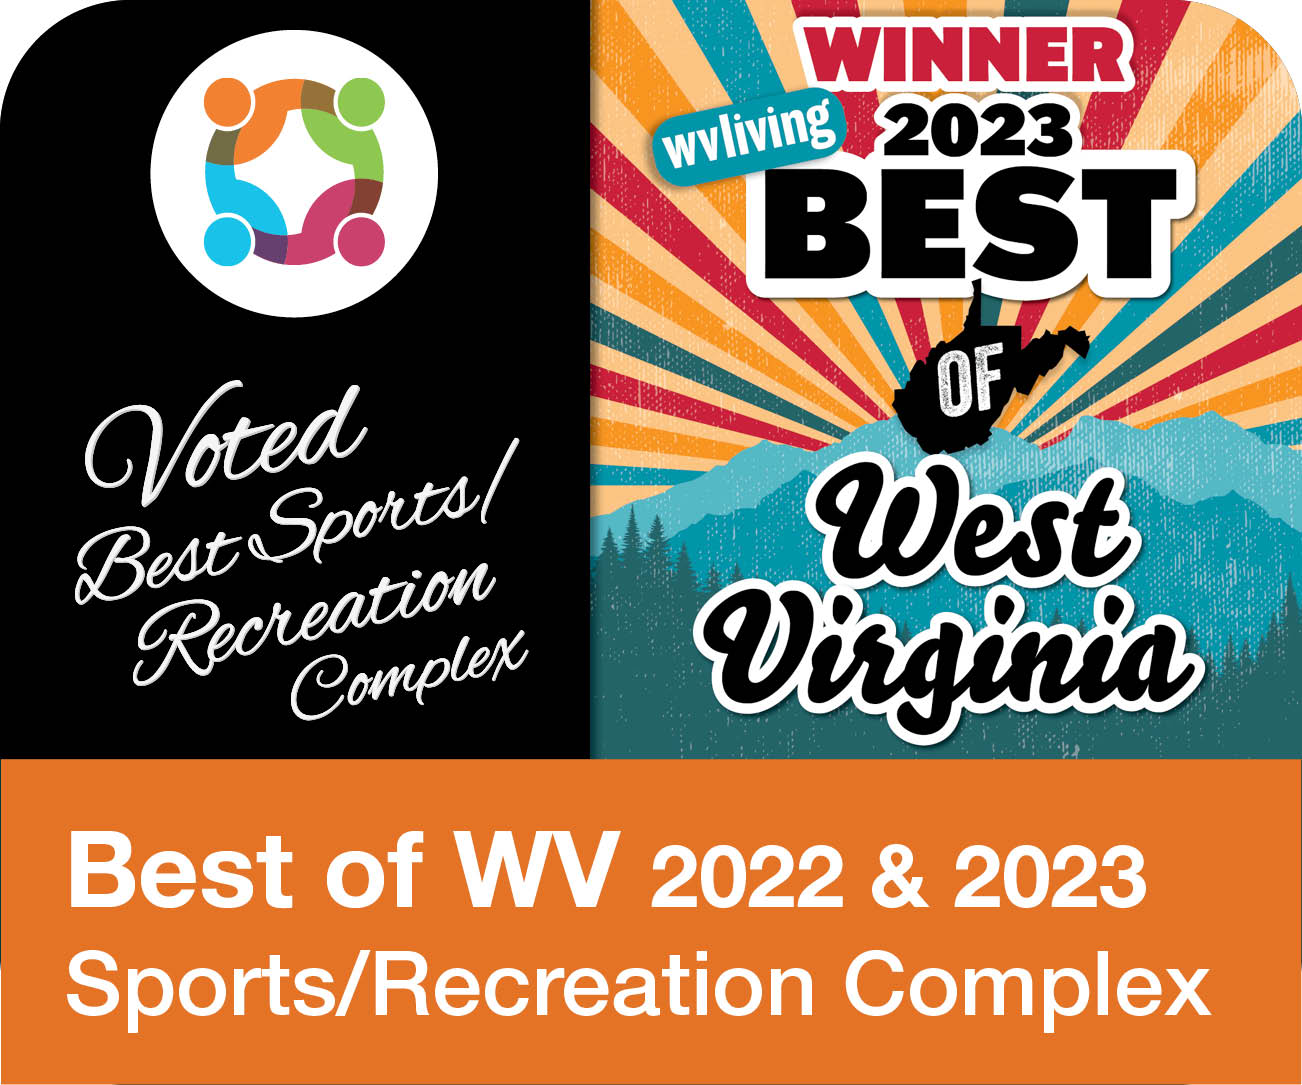 Mylan Park was officially voted Best of WV’s “Best Sports/Recreation Complex” in 2022 AND 2023 by readers and followers of WV Living.